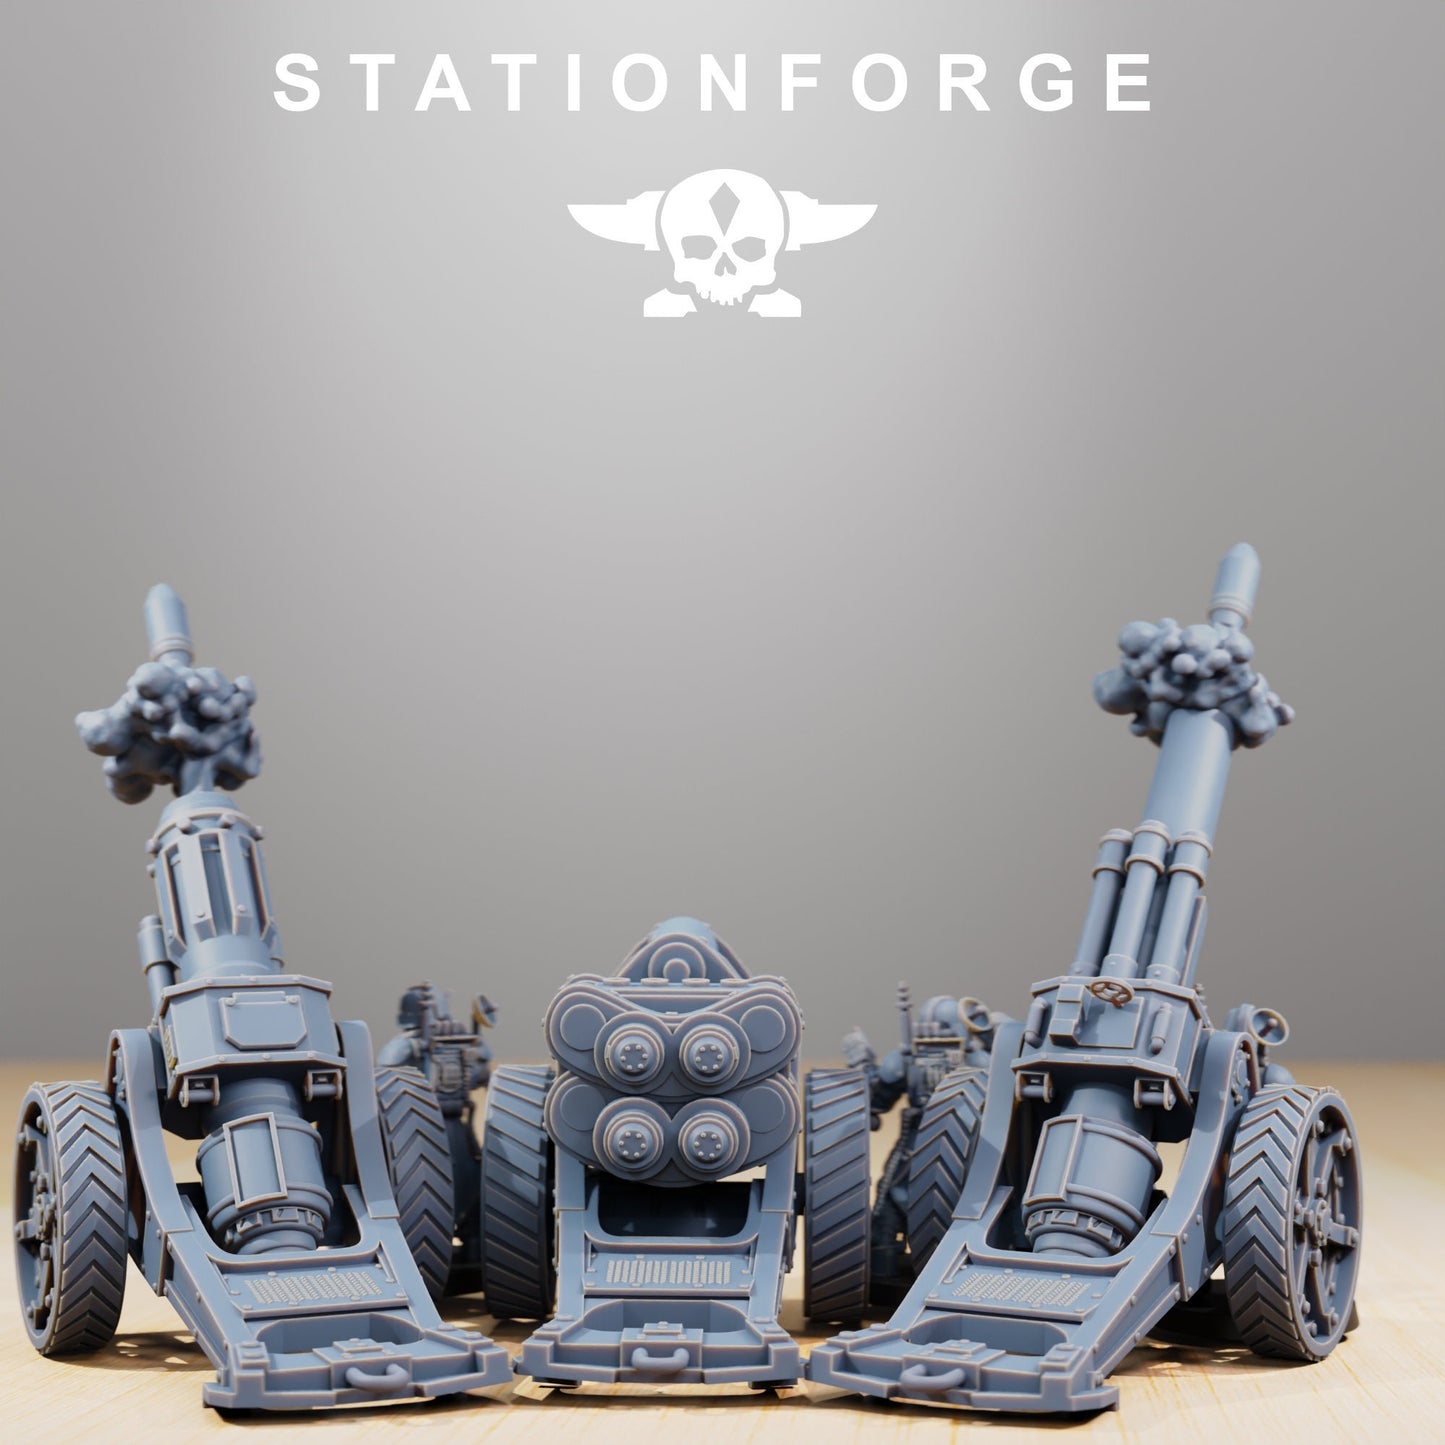 Grim Guard Light Artillery (sculpted by Stationforge)